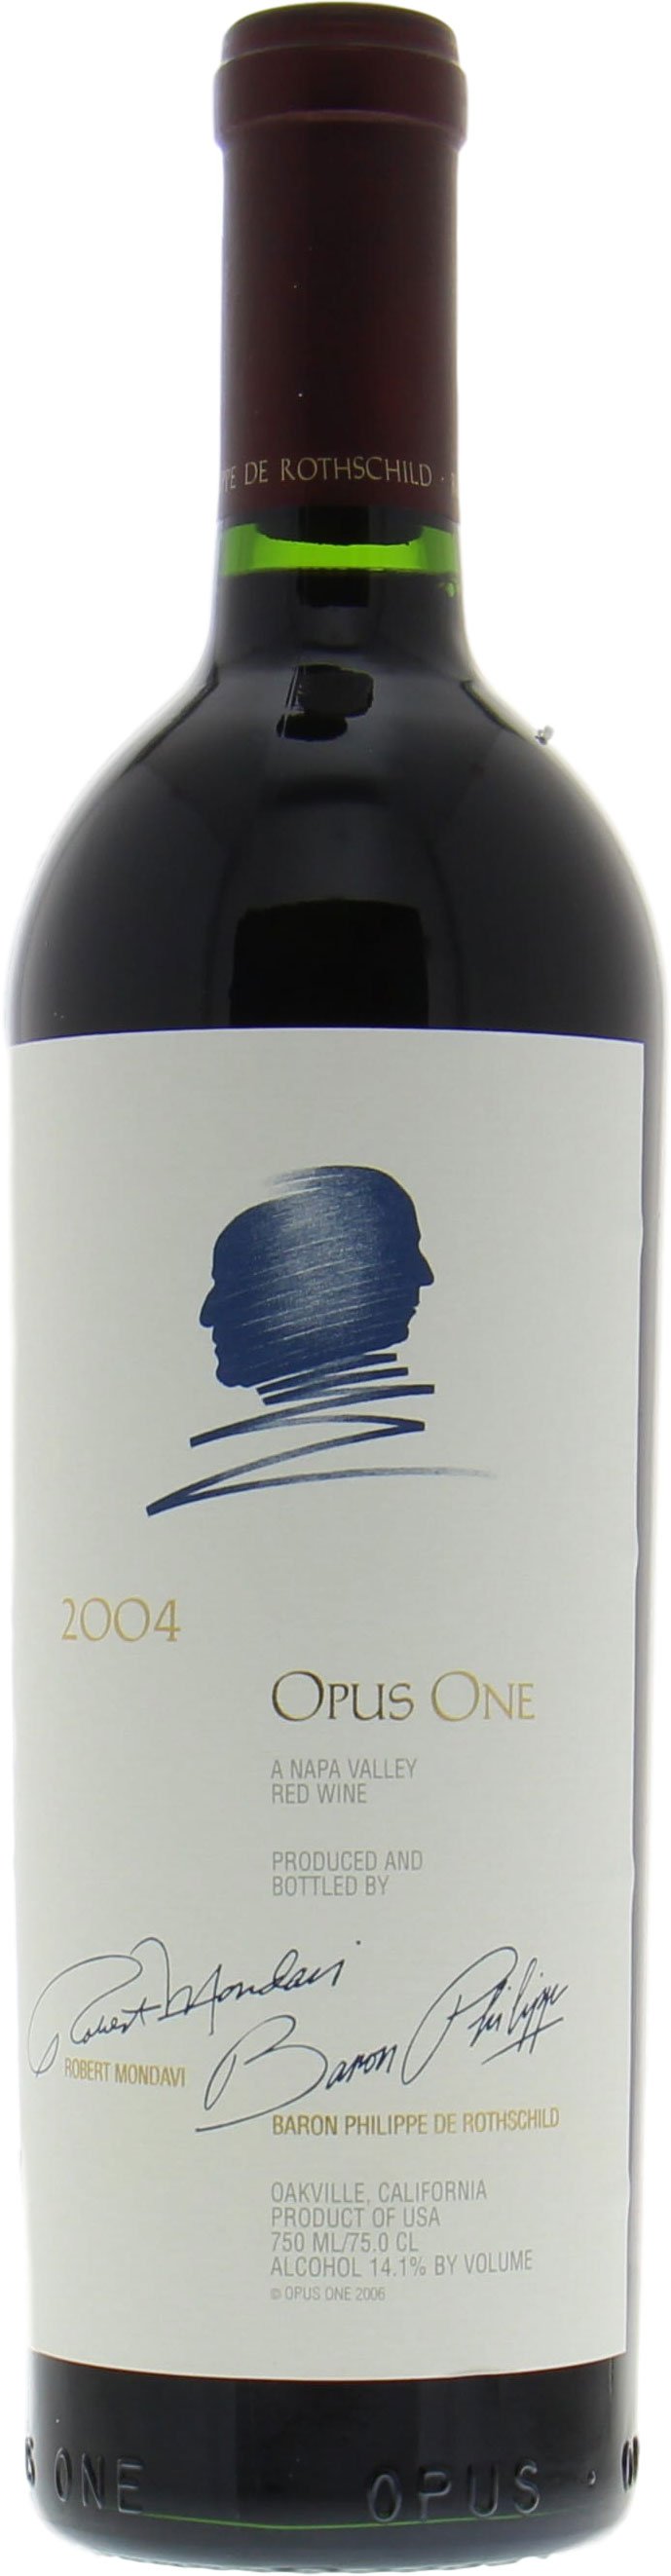 Opus One - Proprietary Red Wine 2004 Perfect